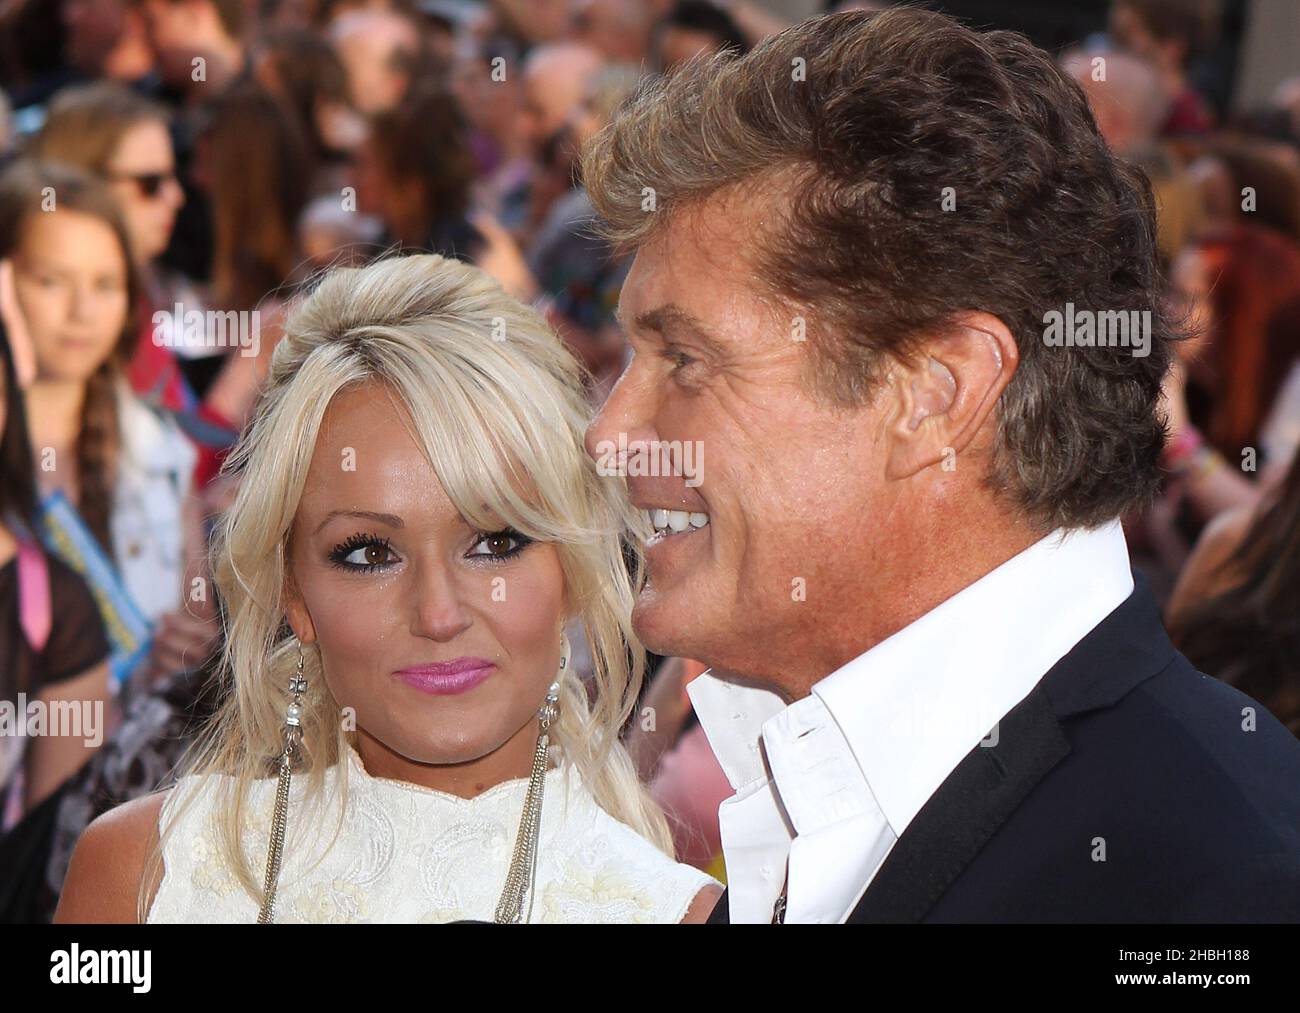 Hayley Roberts and David Hasselhoff arriving at the World Premier of Keith Lemon The Film at the Odeon West End,Leicester Square in London. Stock Photo